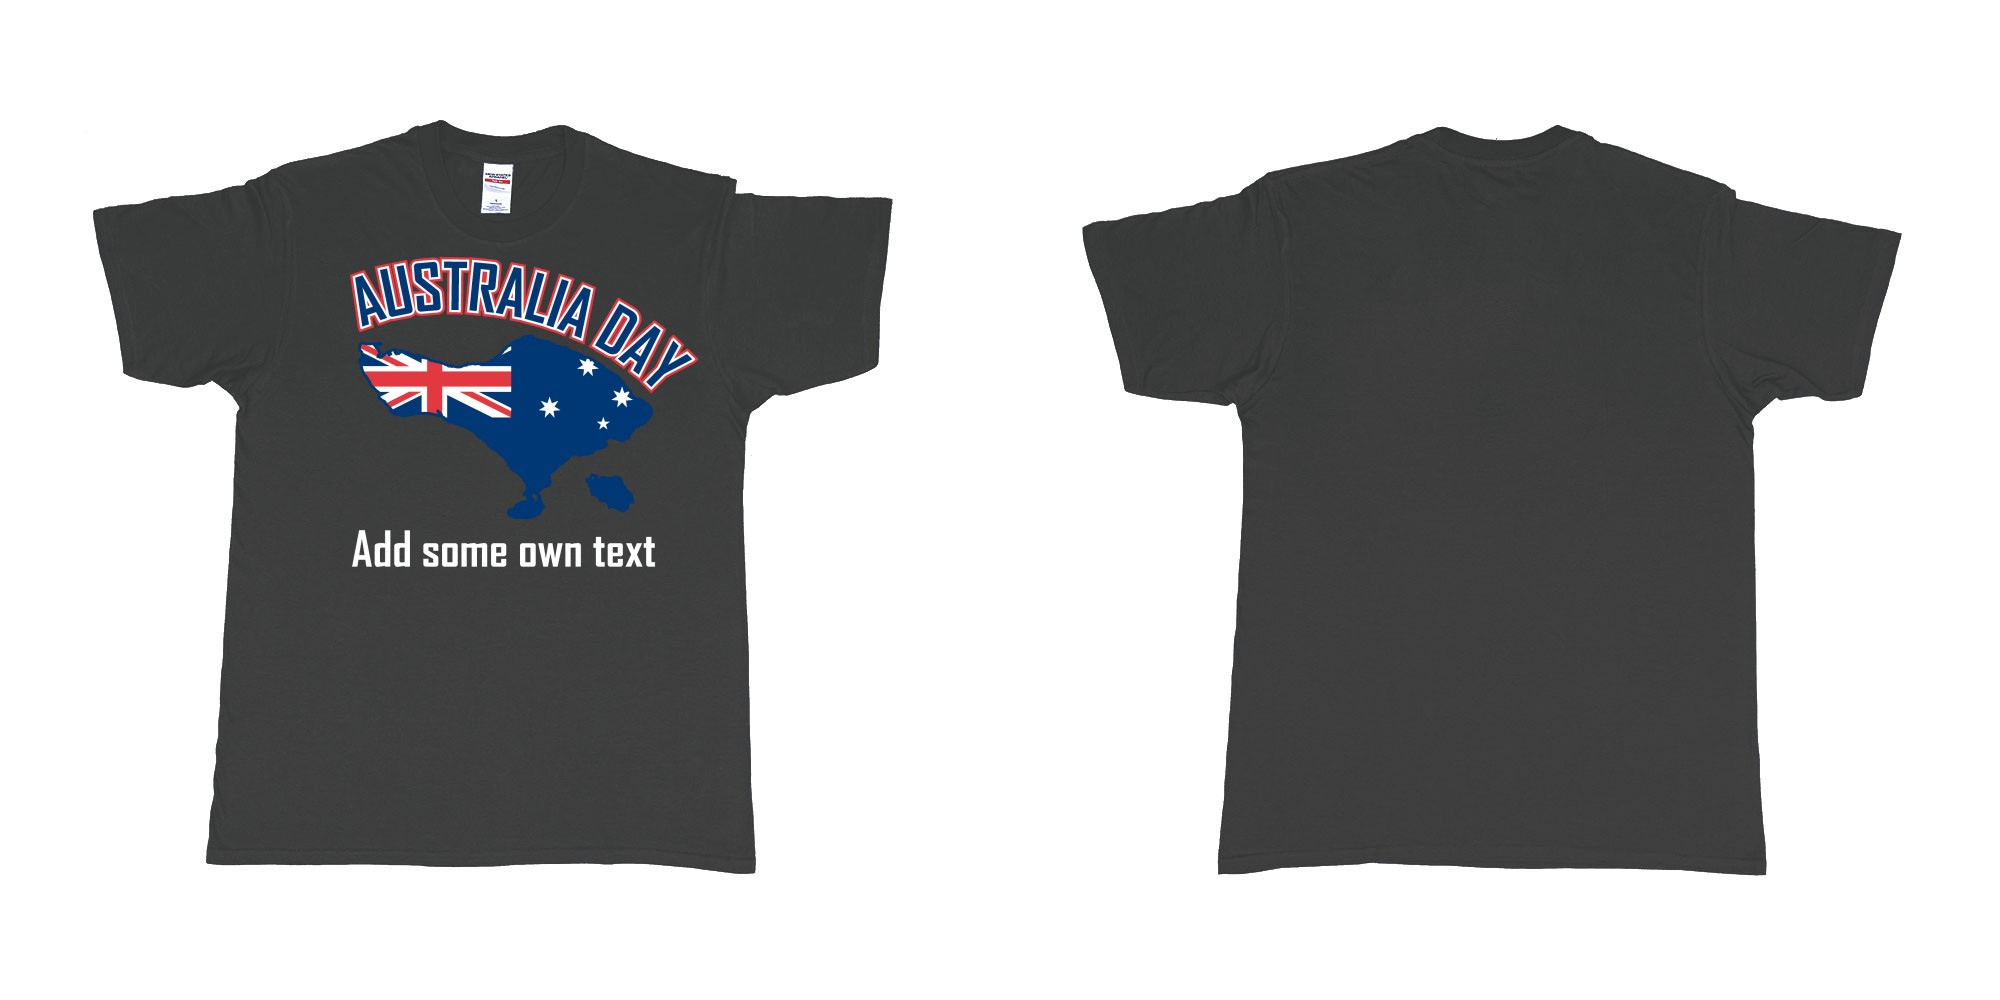 Custom tshirt design australia day in bali custom teeshirt printing in fabric color black choice your own text made in Bali by The Pirate Way